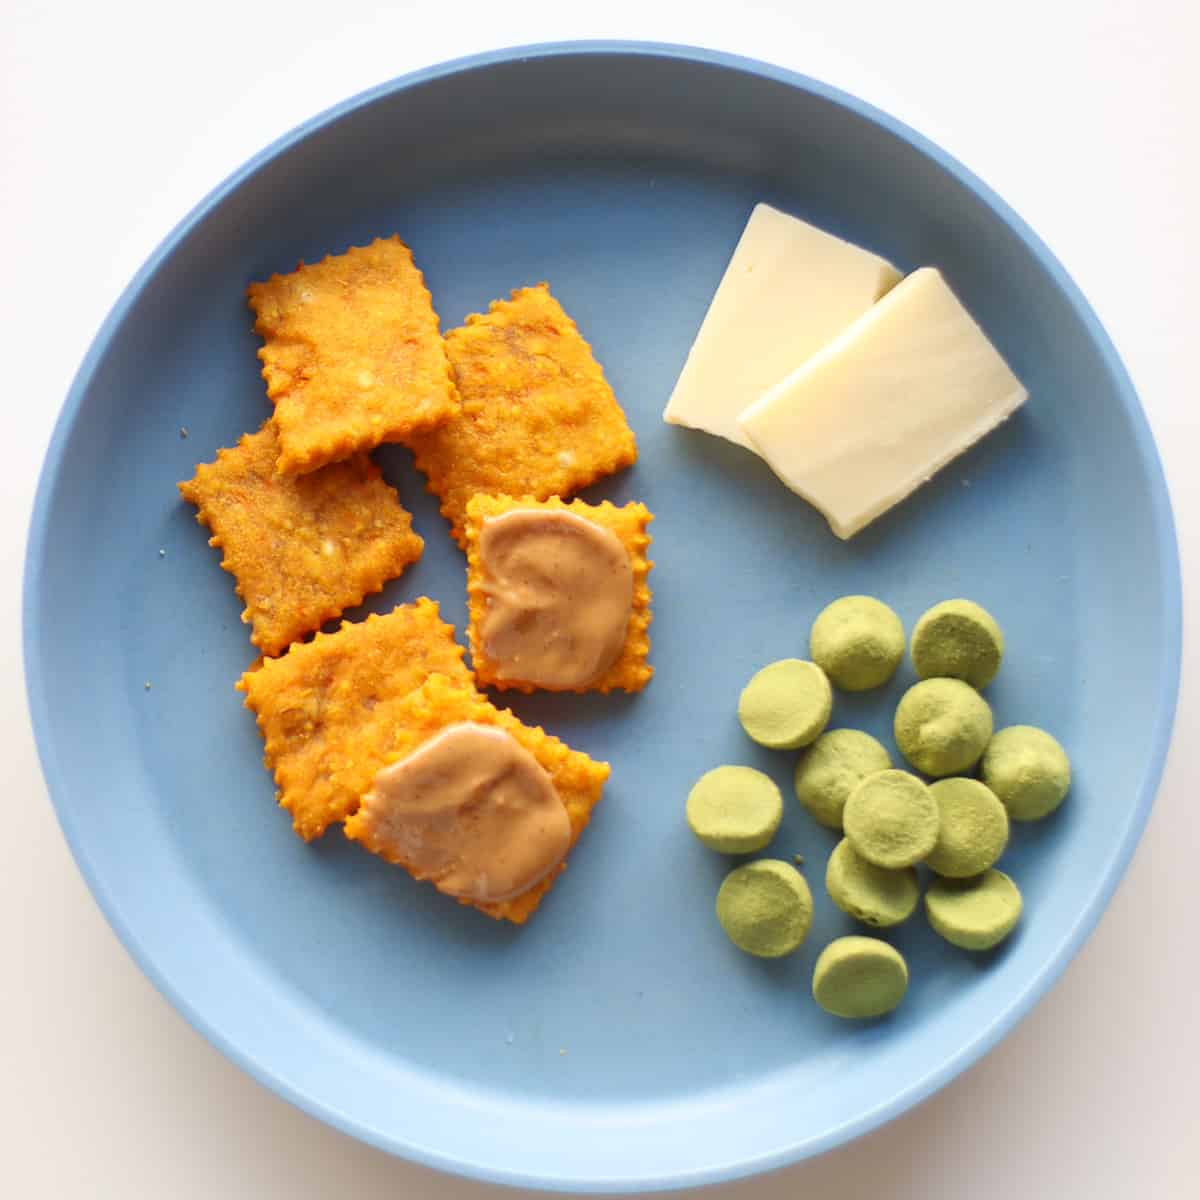 A plate for toddlers with cheese crackers and other snacks.